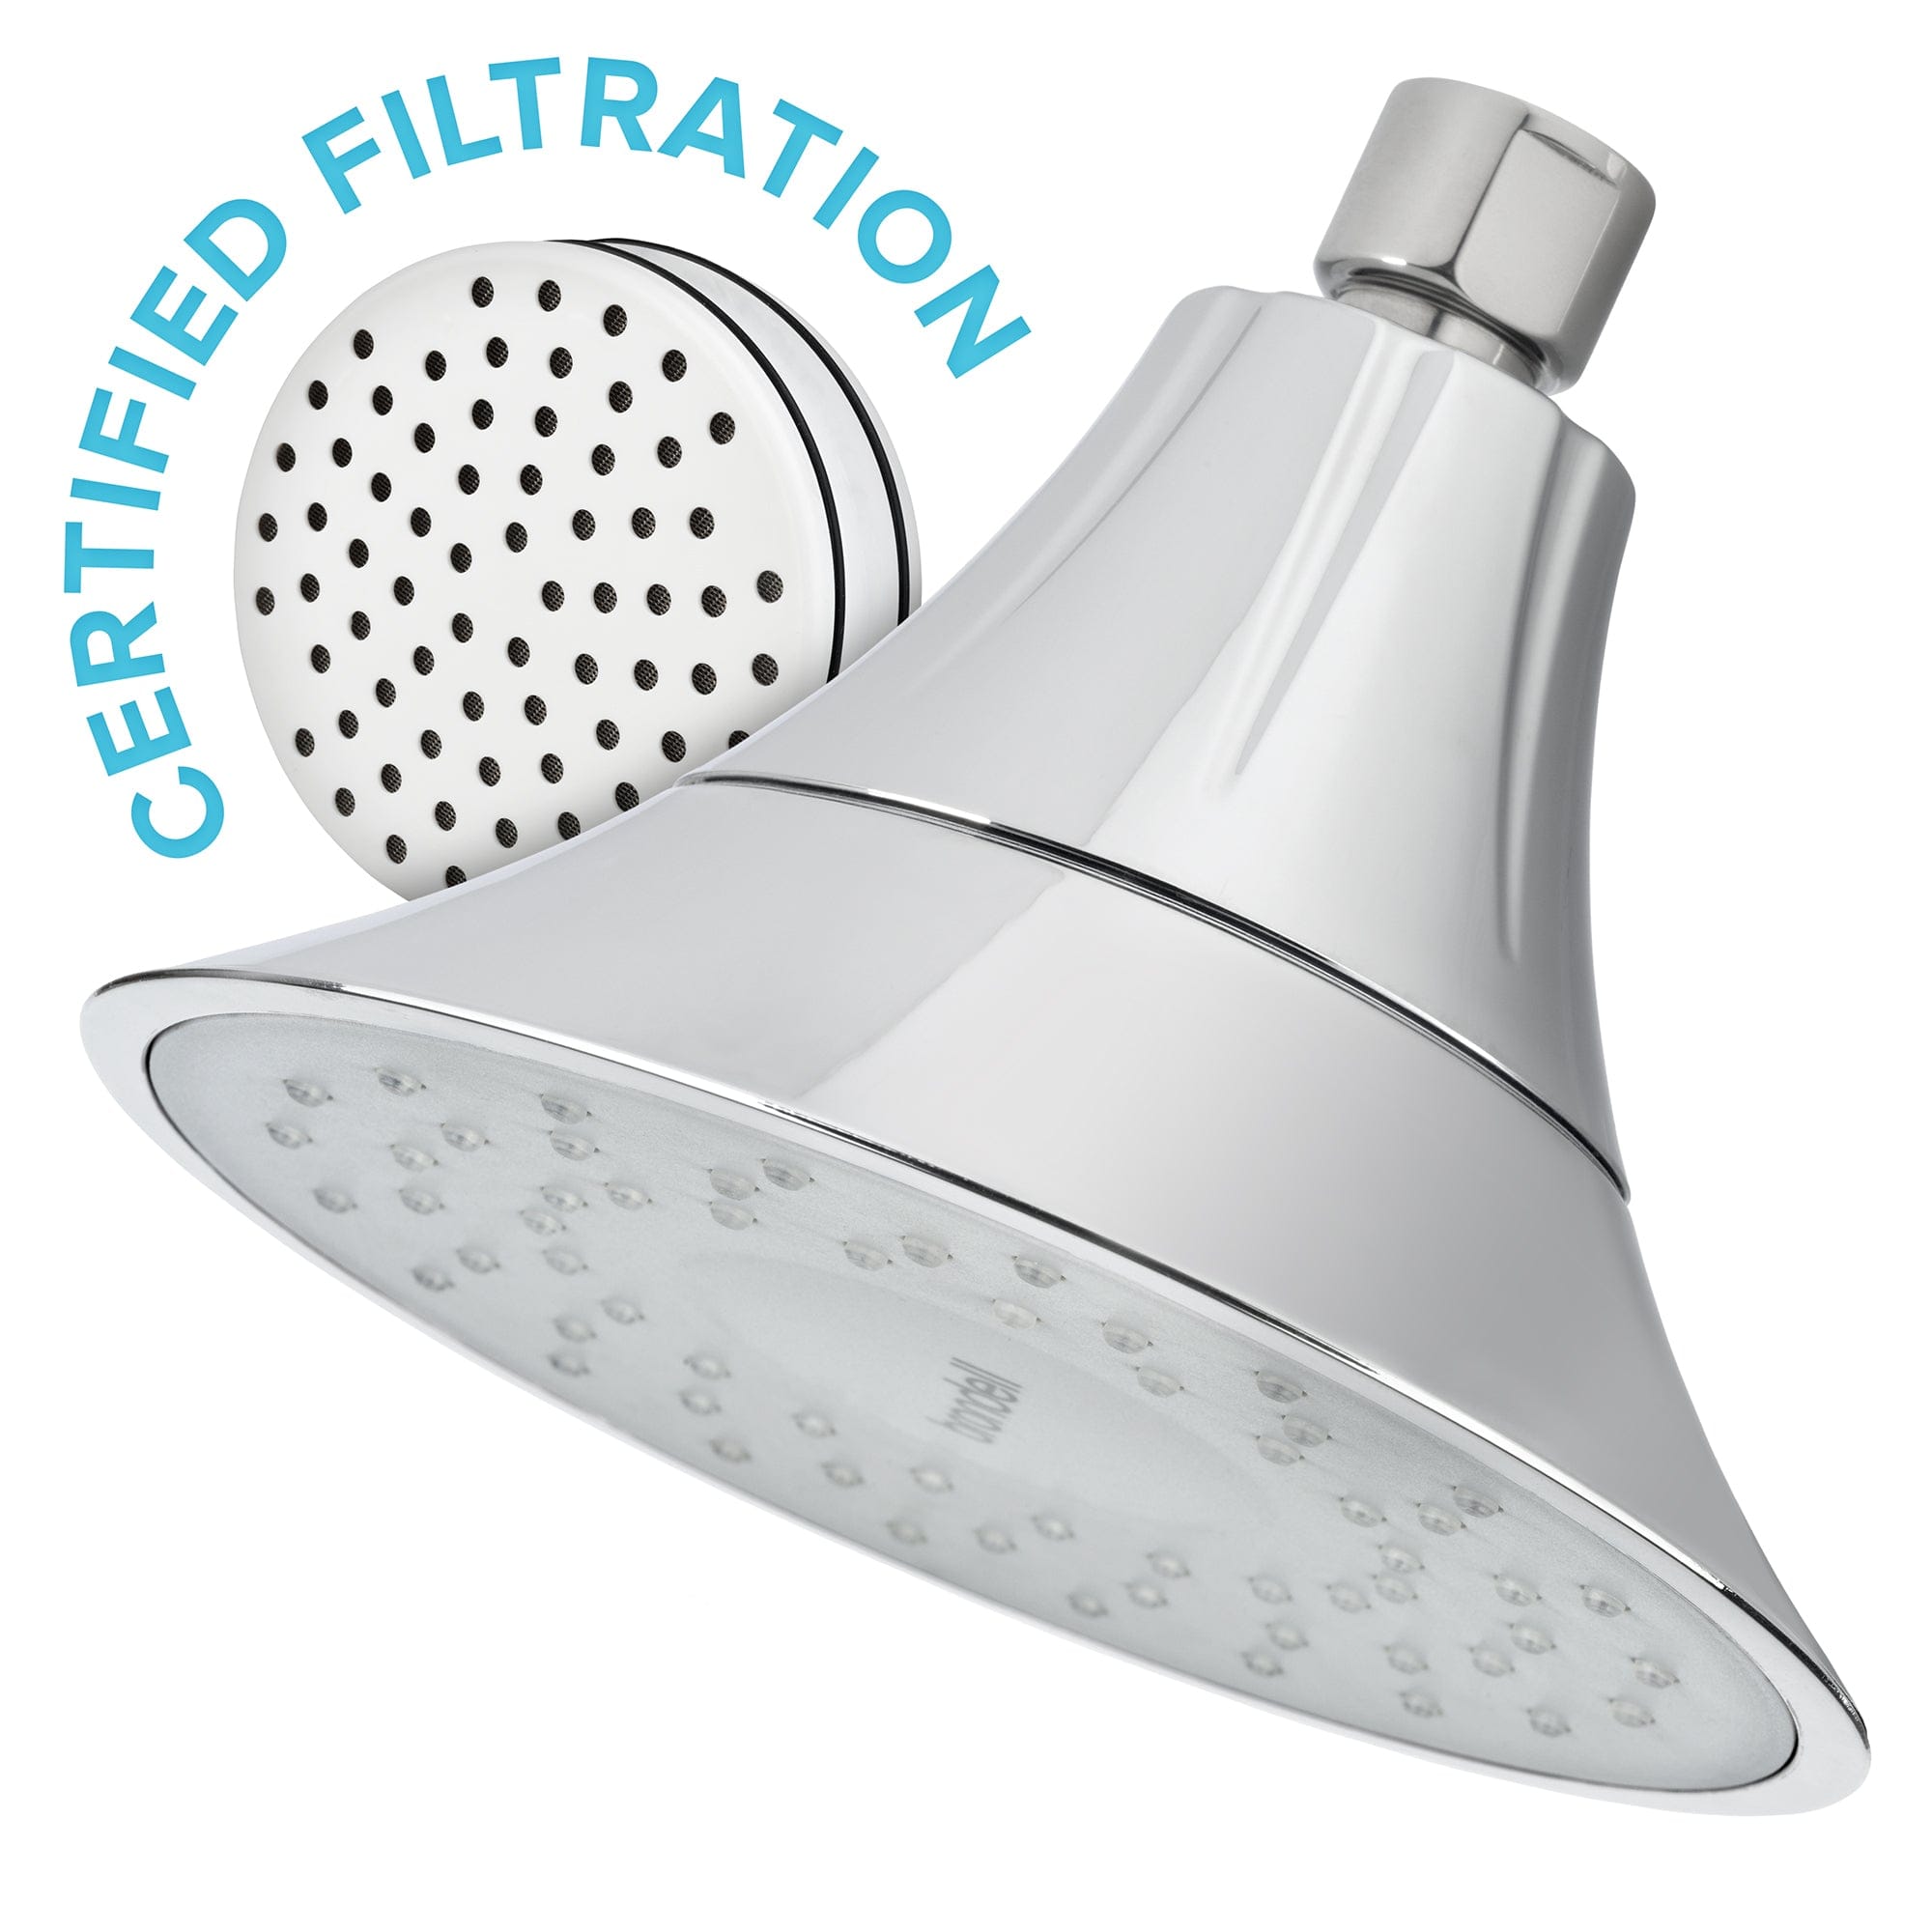 VivaSpring Filtered Showerhead in Chrome with Slate Face - Molaix819911012725VIVASPRING FILTERED SHOWER HEADFSH25-CG